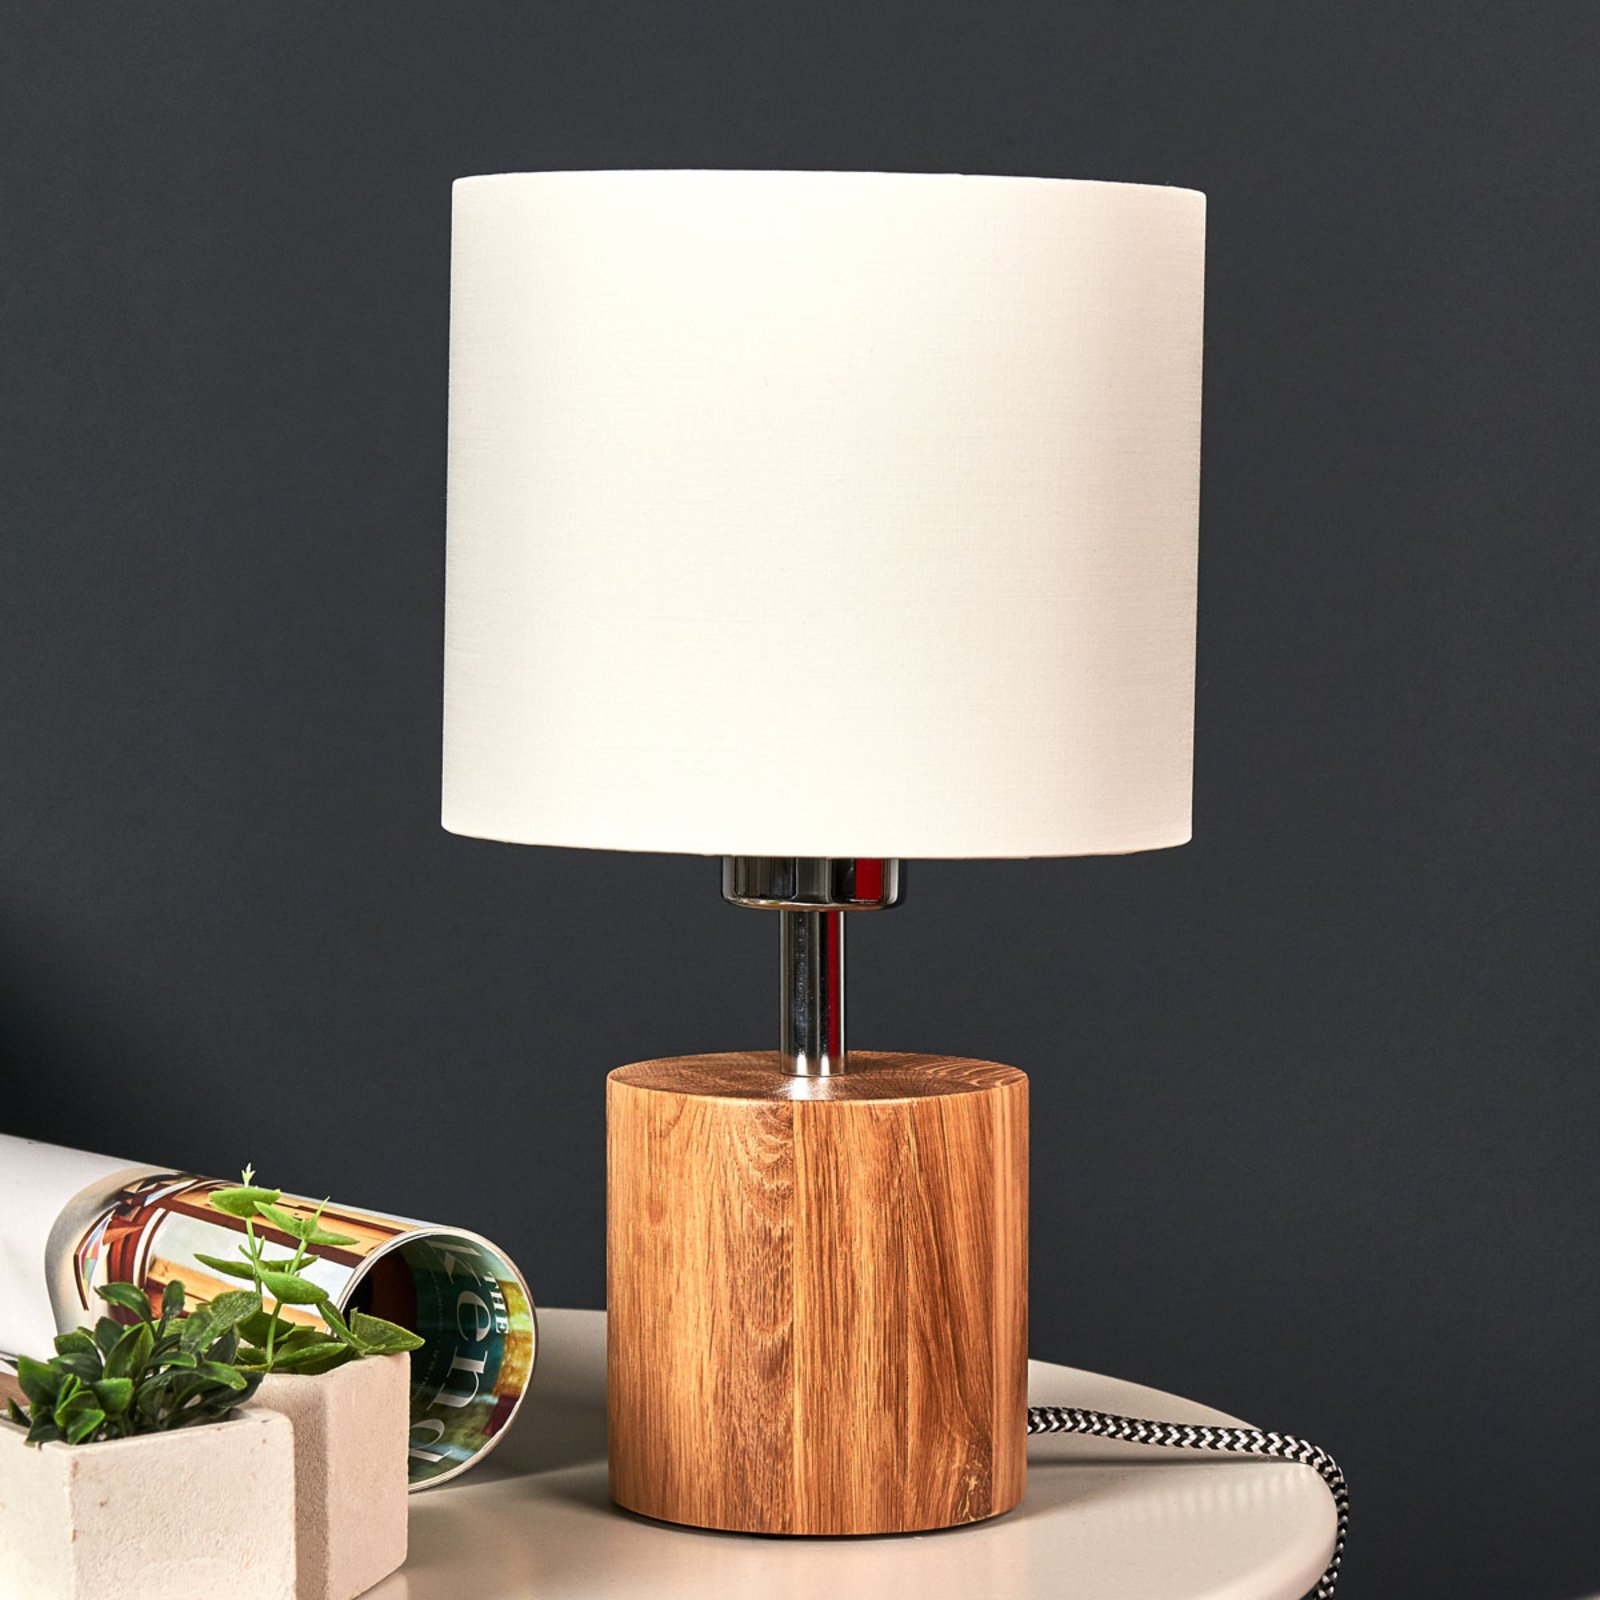 Trongo table lamp, cylinder oiled, lampshade